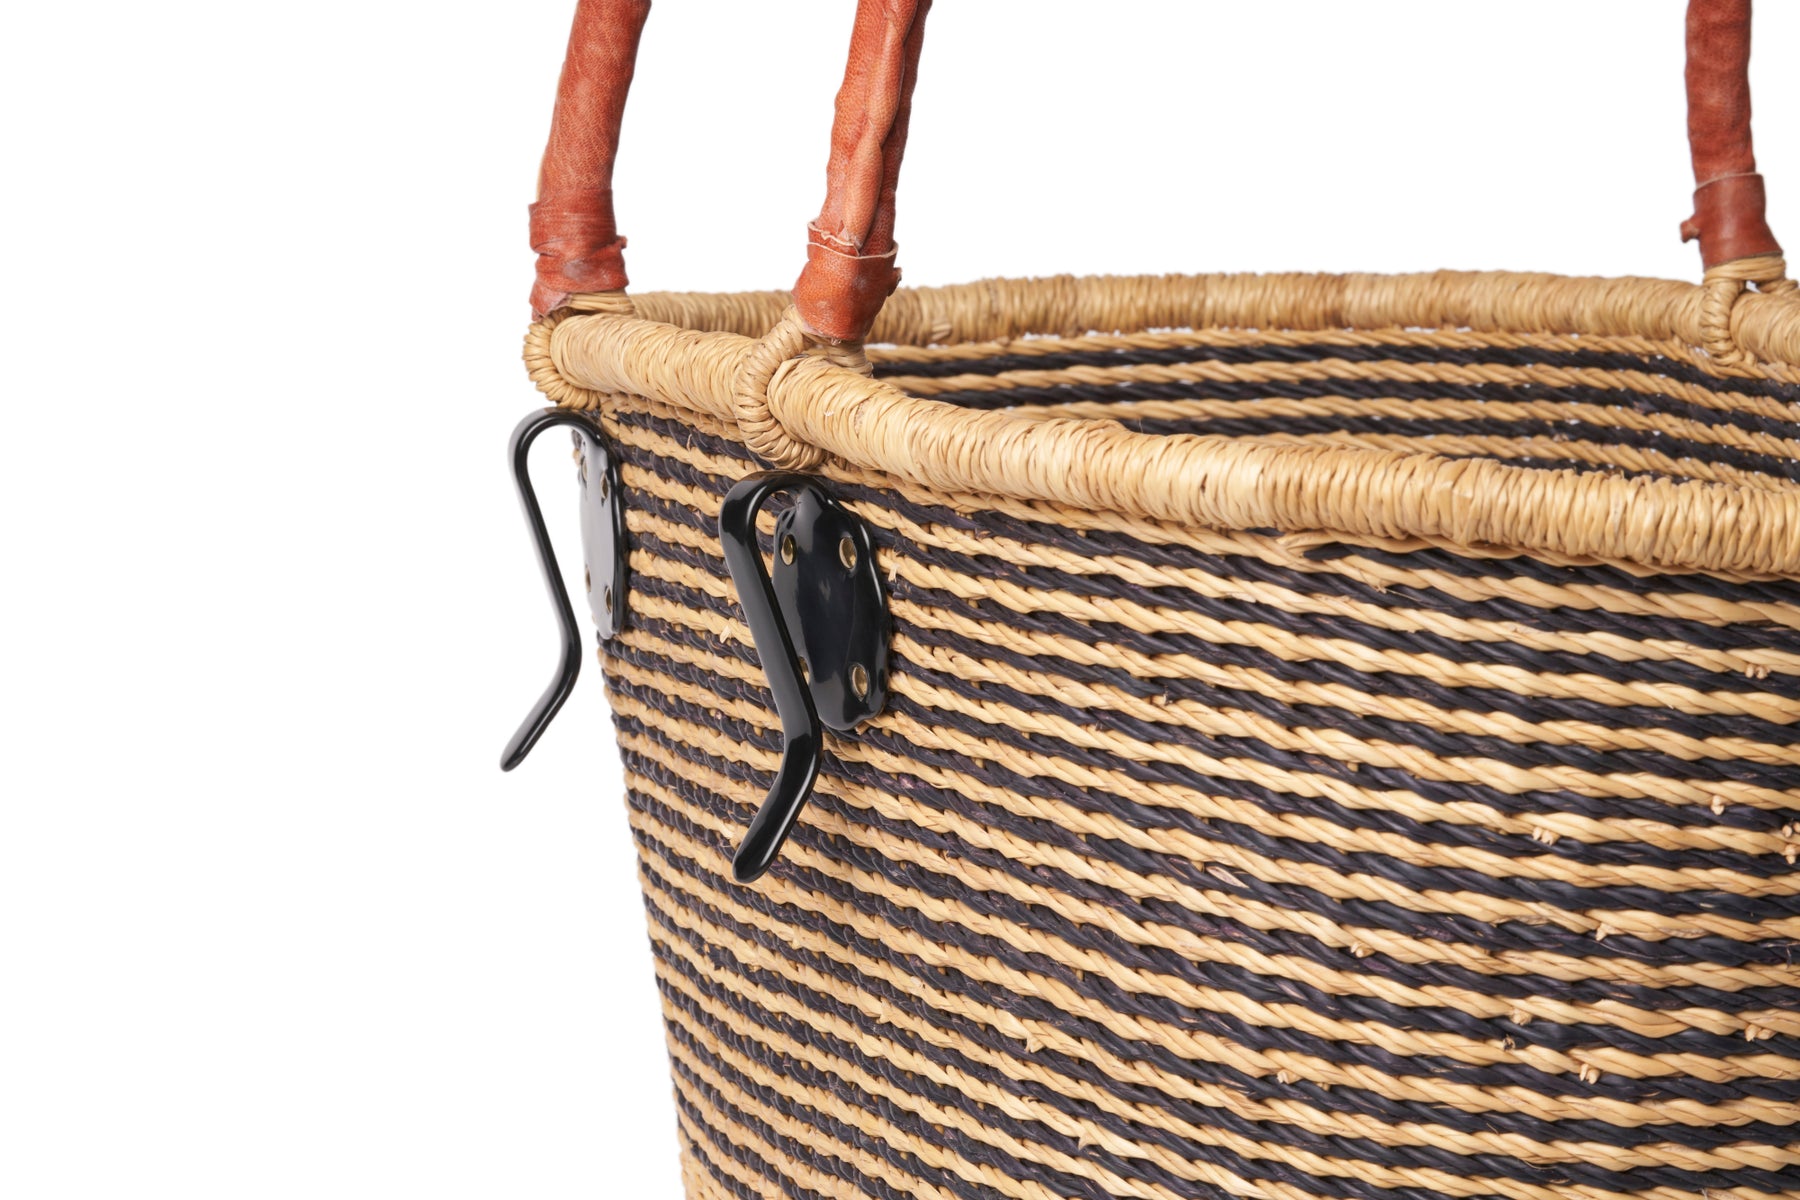 NEW Tapered Bicycle Basket Bolga Basket Small Front 